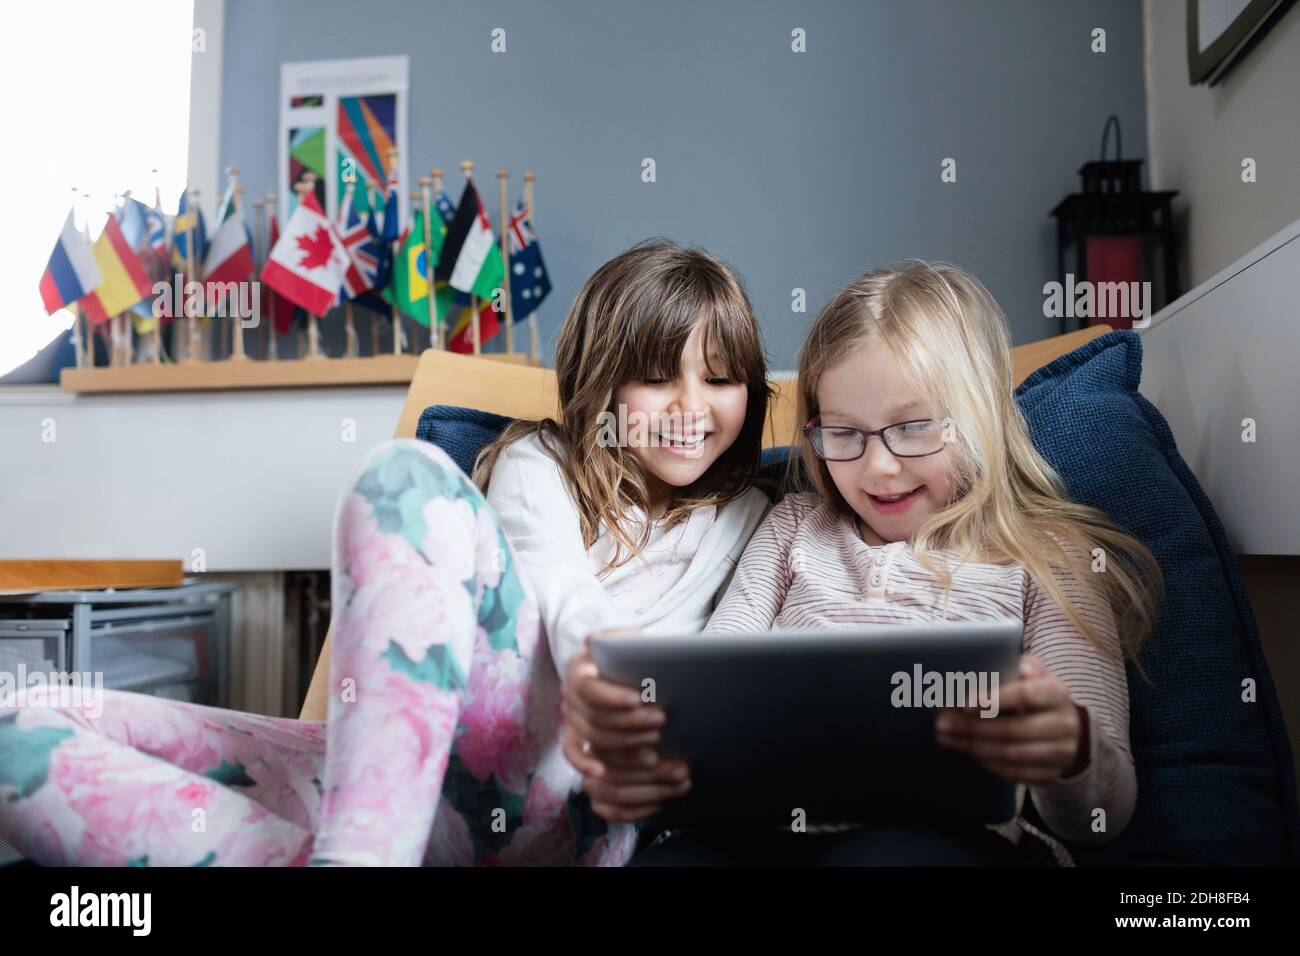 Smiling friends using digital tablet while resting on sofa in school Stock Photo